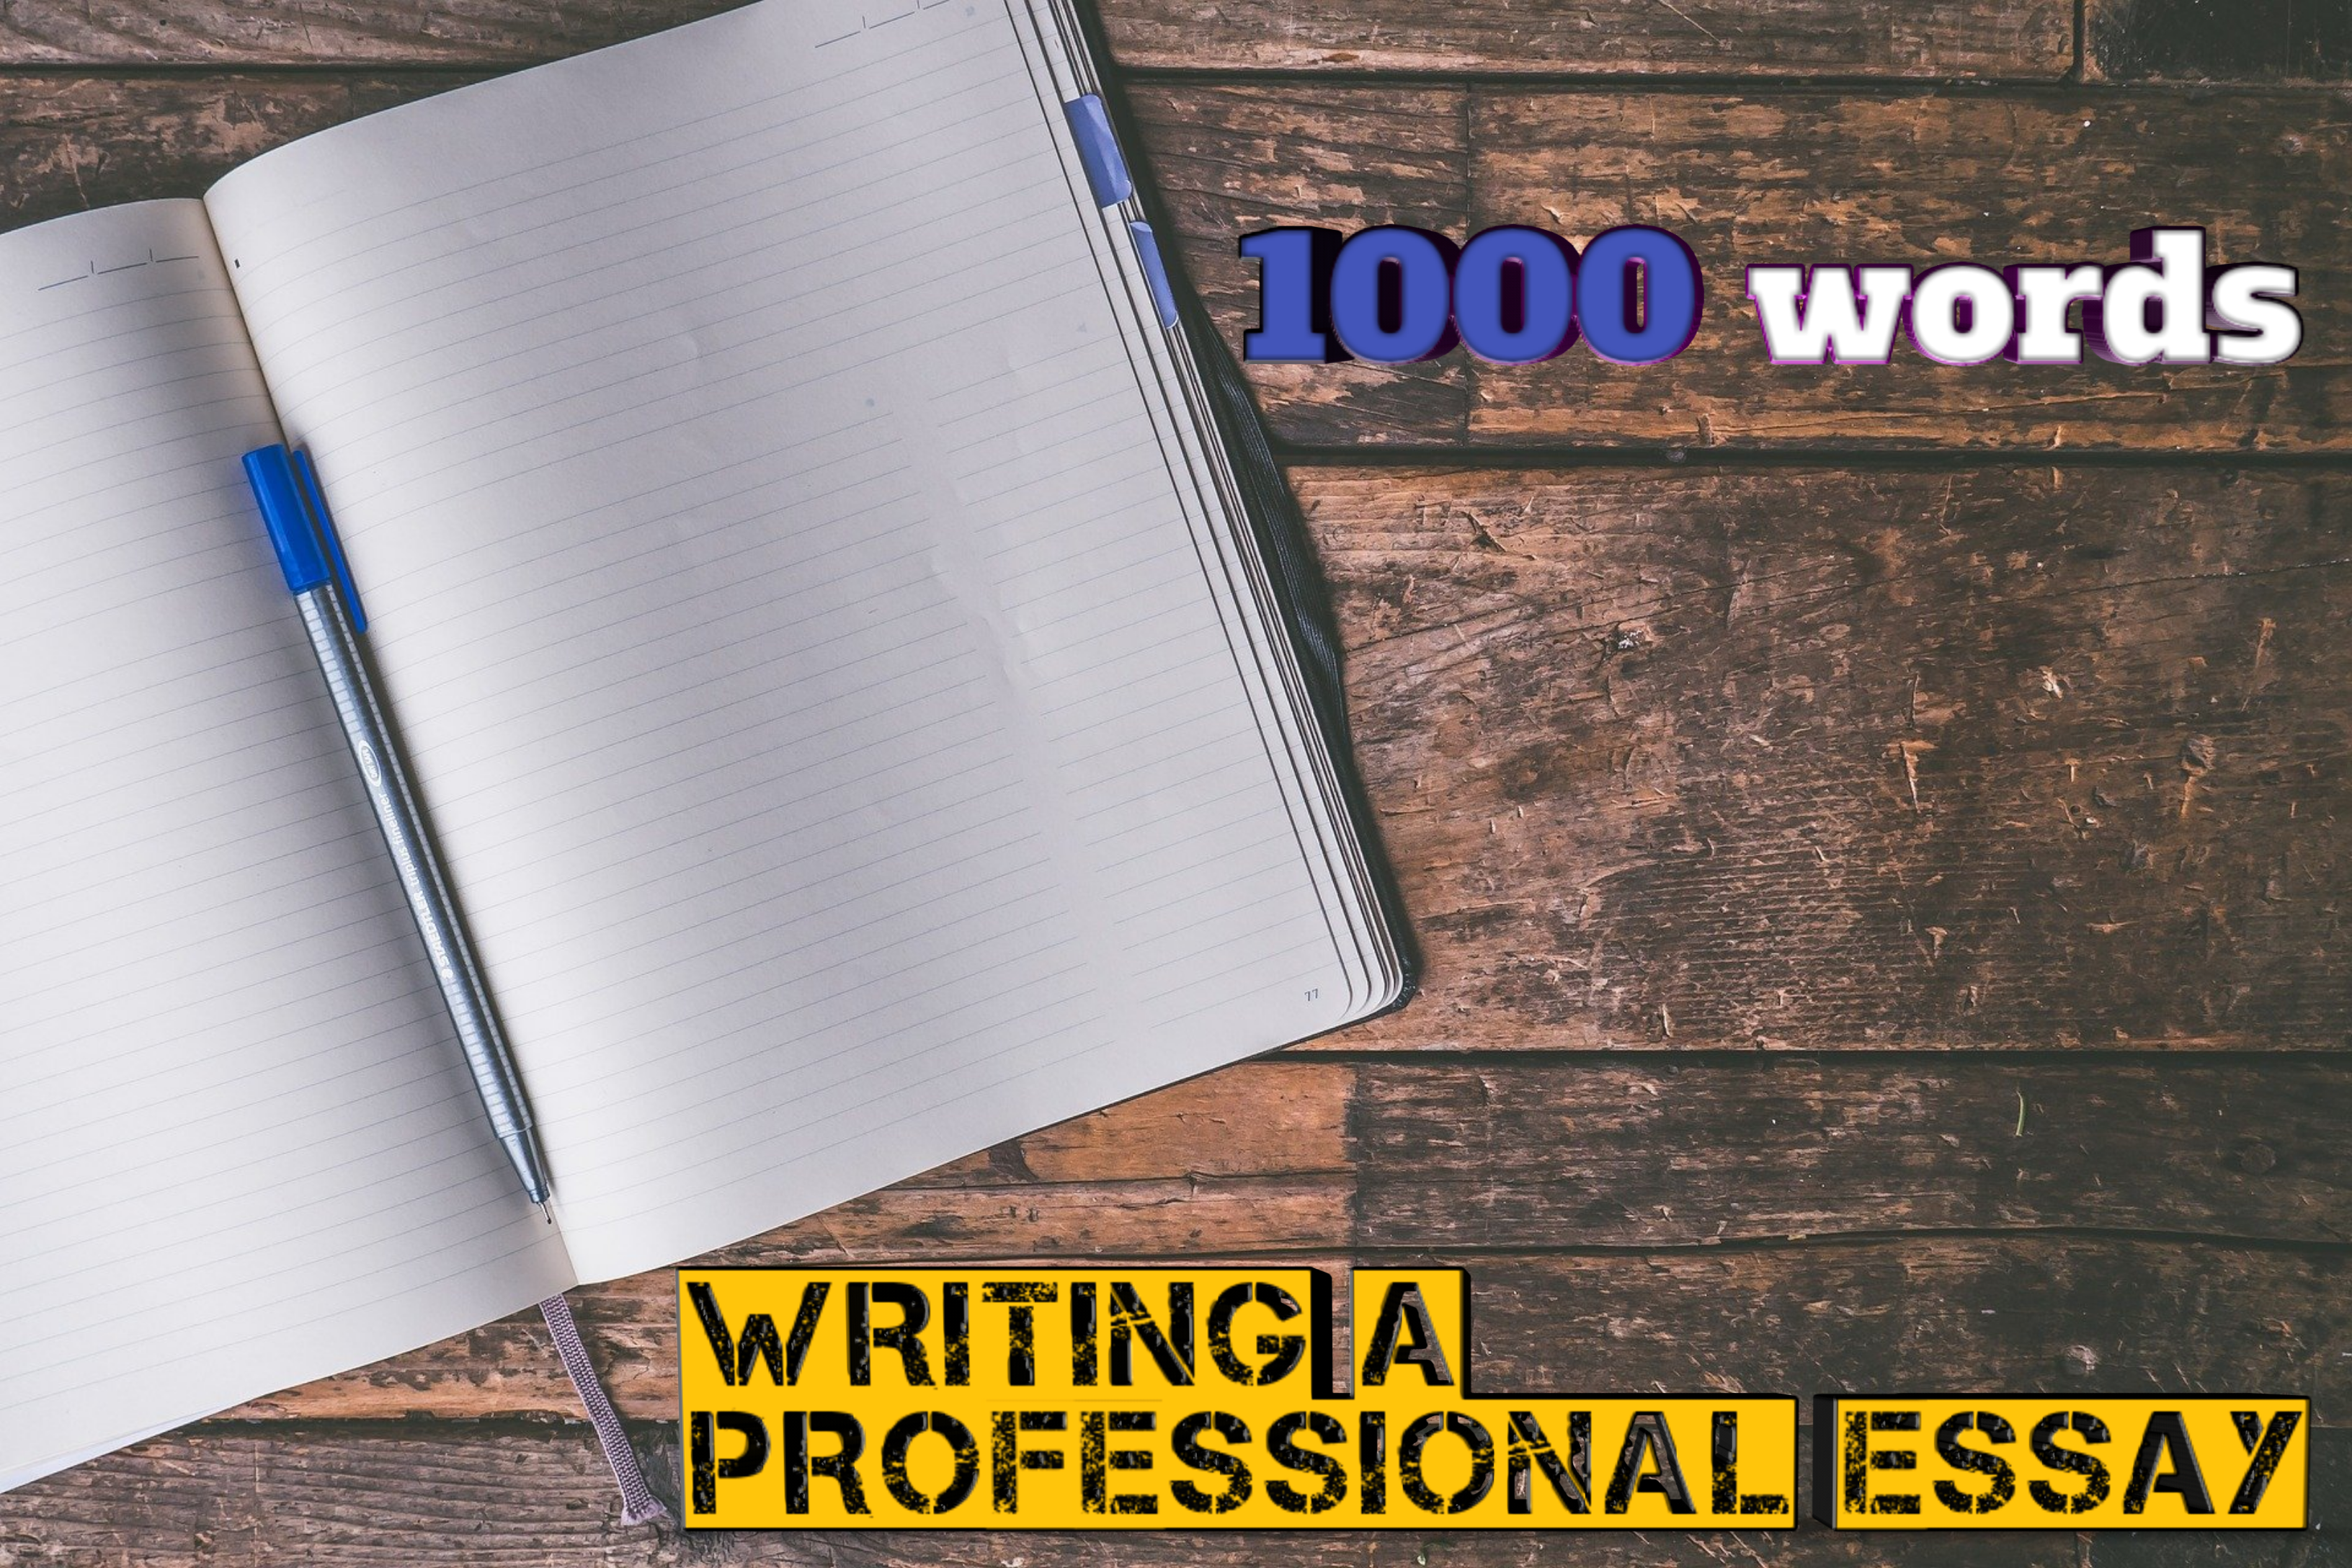 Writing a professional essay in all fields 1000 words best quality